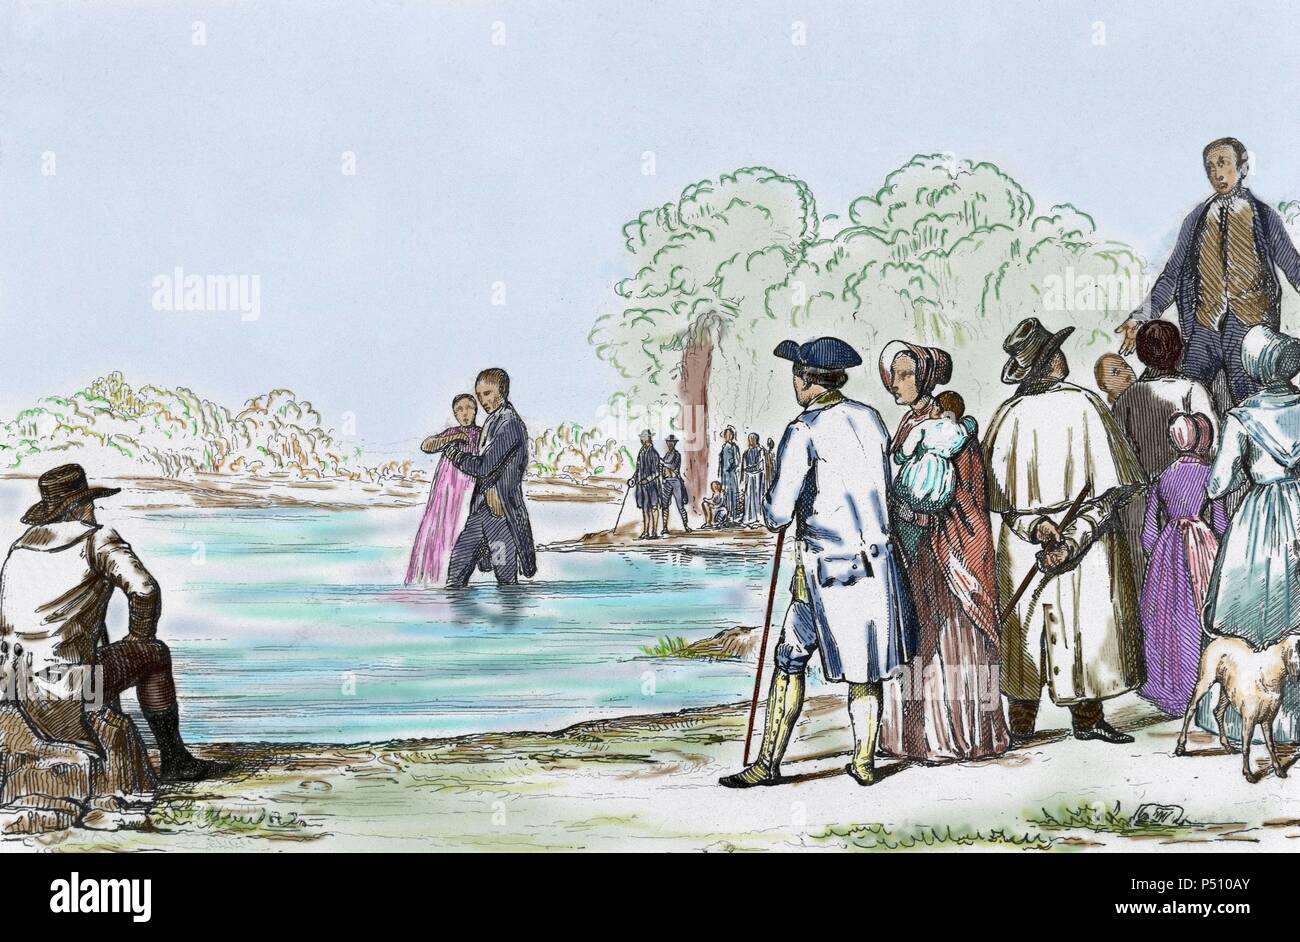 United States. Virginia. Anabaptist Baptism. Their ideology lay in the acceptance of baptism of adults only. 17th century. Colored engraving, 1841. Stock Photo